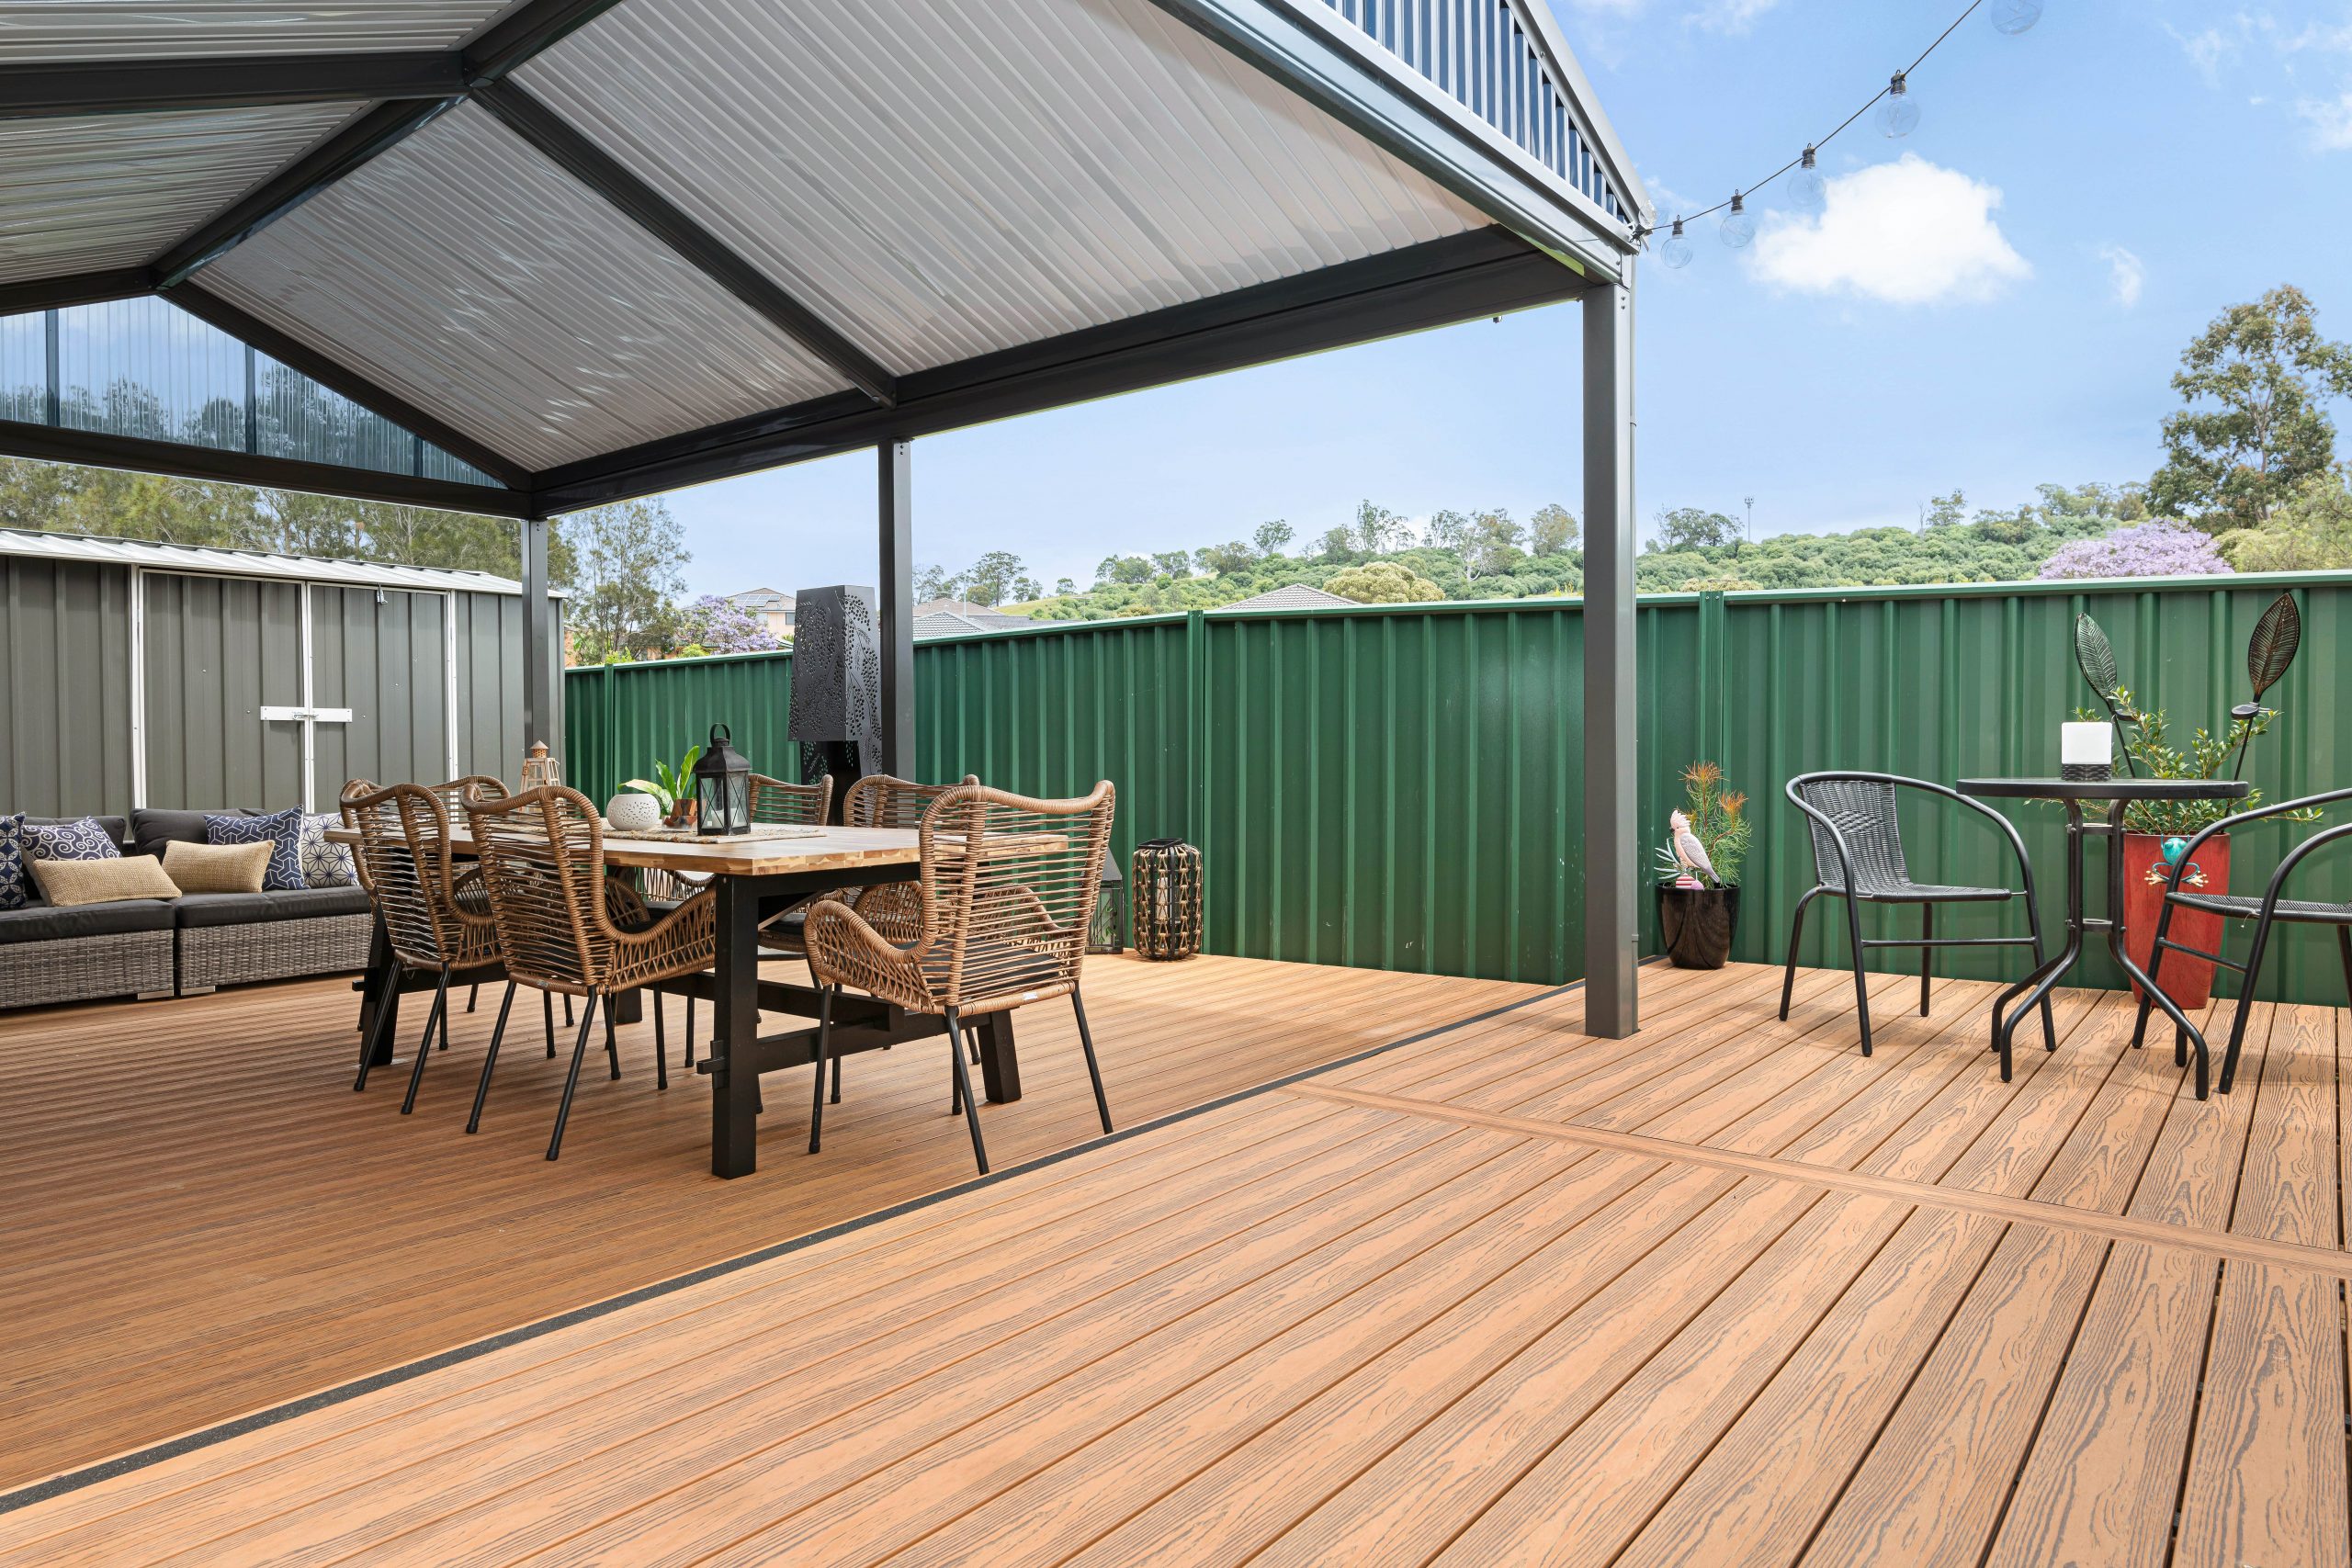 KEARNS Project Composite Decking For Your Backyard - Brite Decking